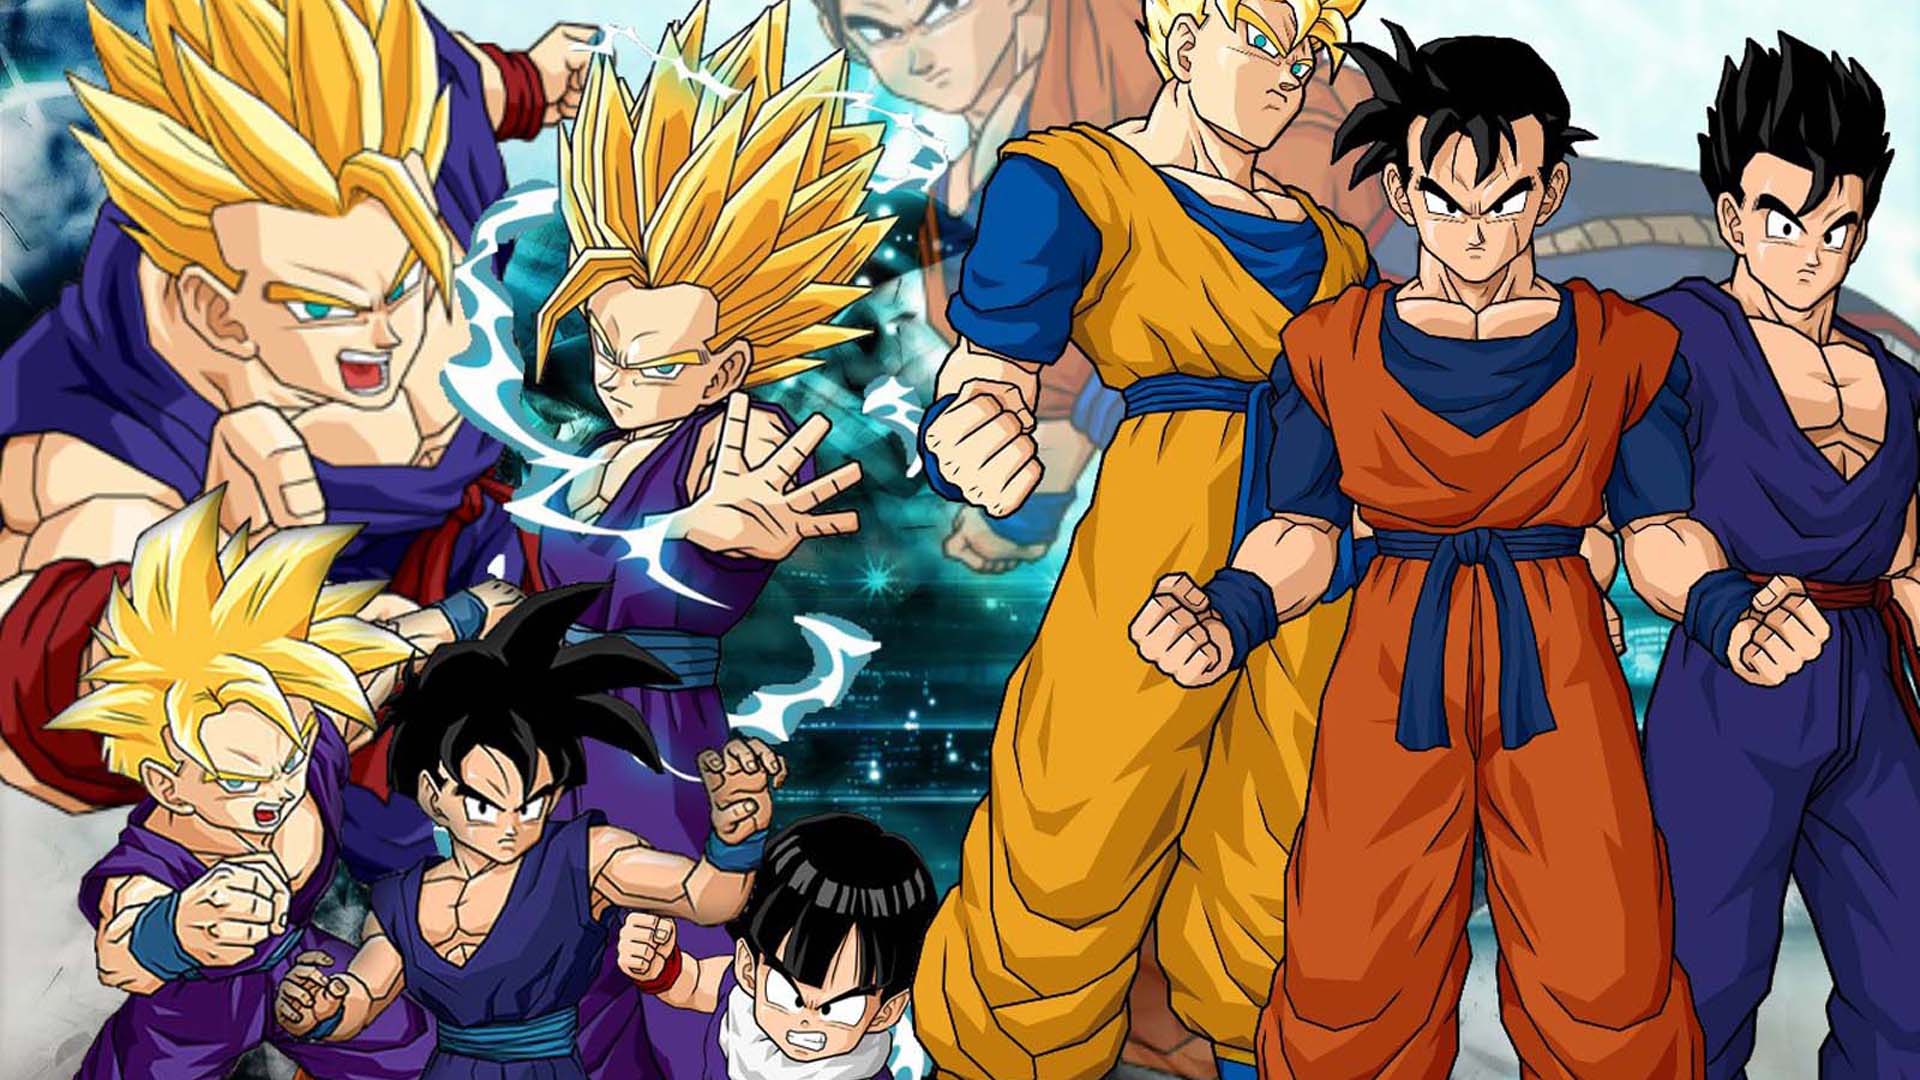 Dragonball HD 1920x1080 Wallpapers 1920x1080 Wallpapers Pictures